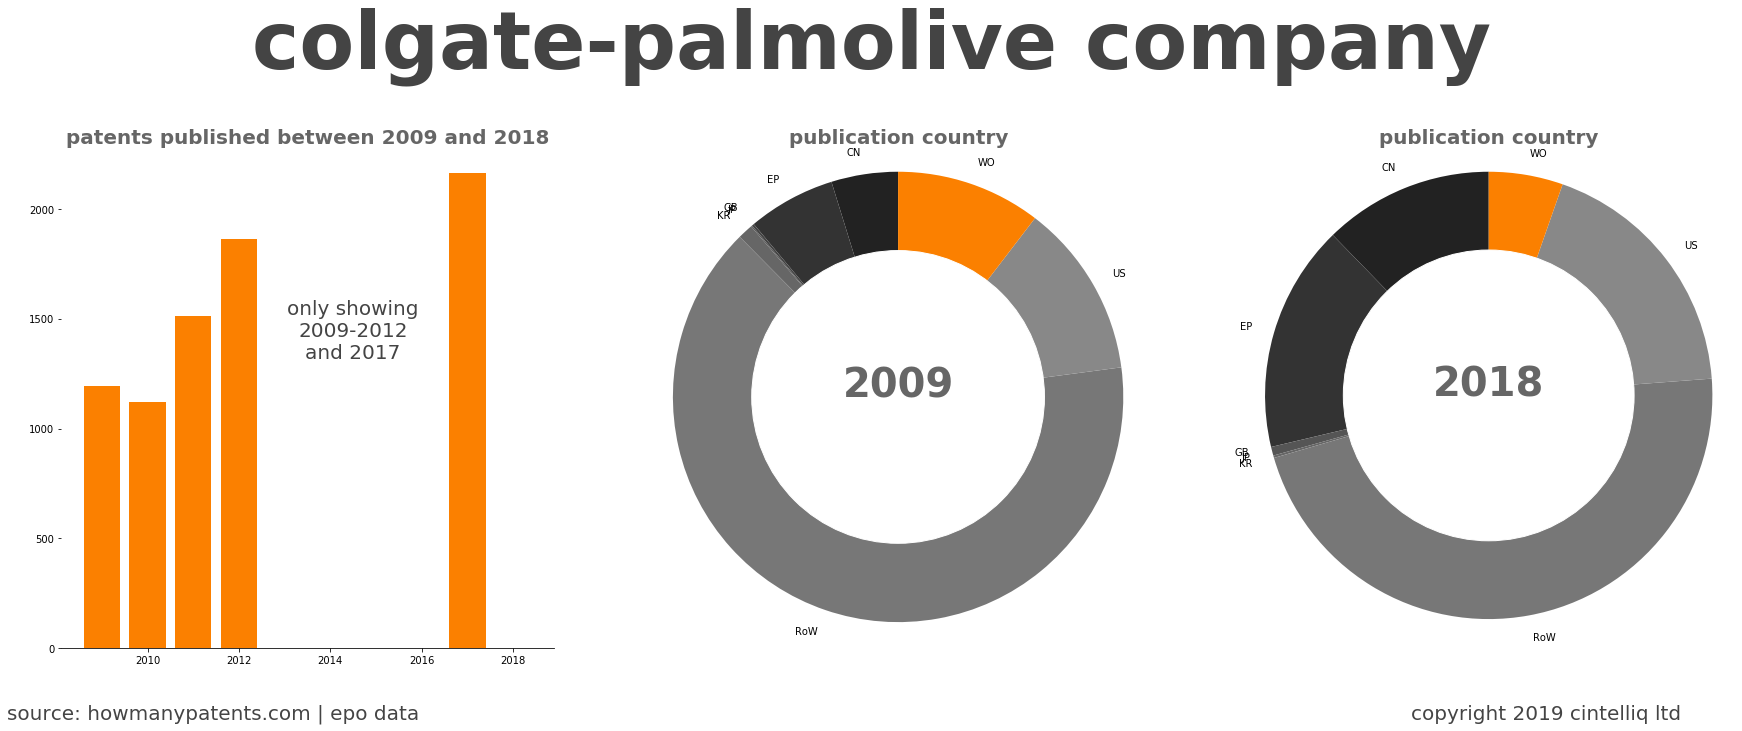 summary of patents for Colgate-Palmolive Company